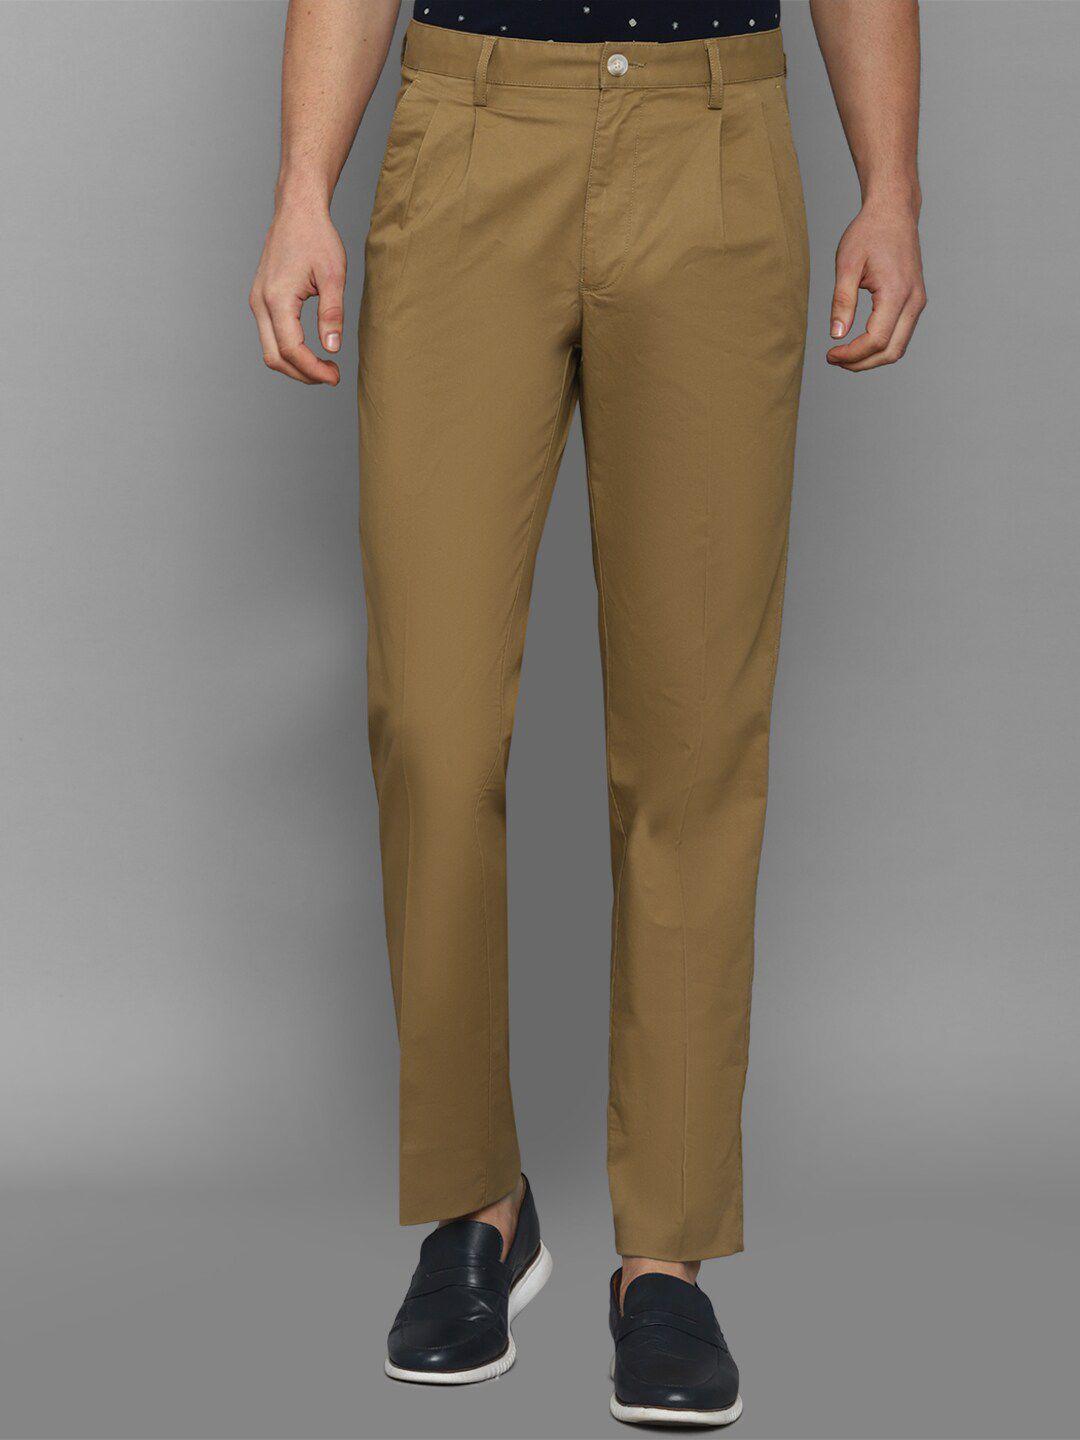 allen solly men brown pleated trousers